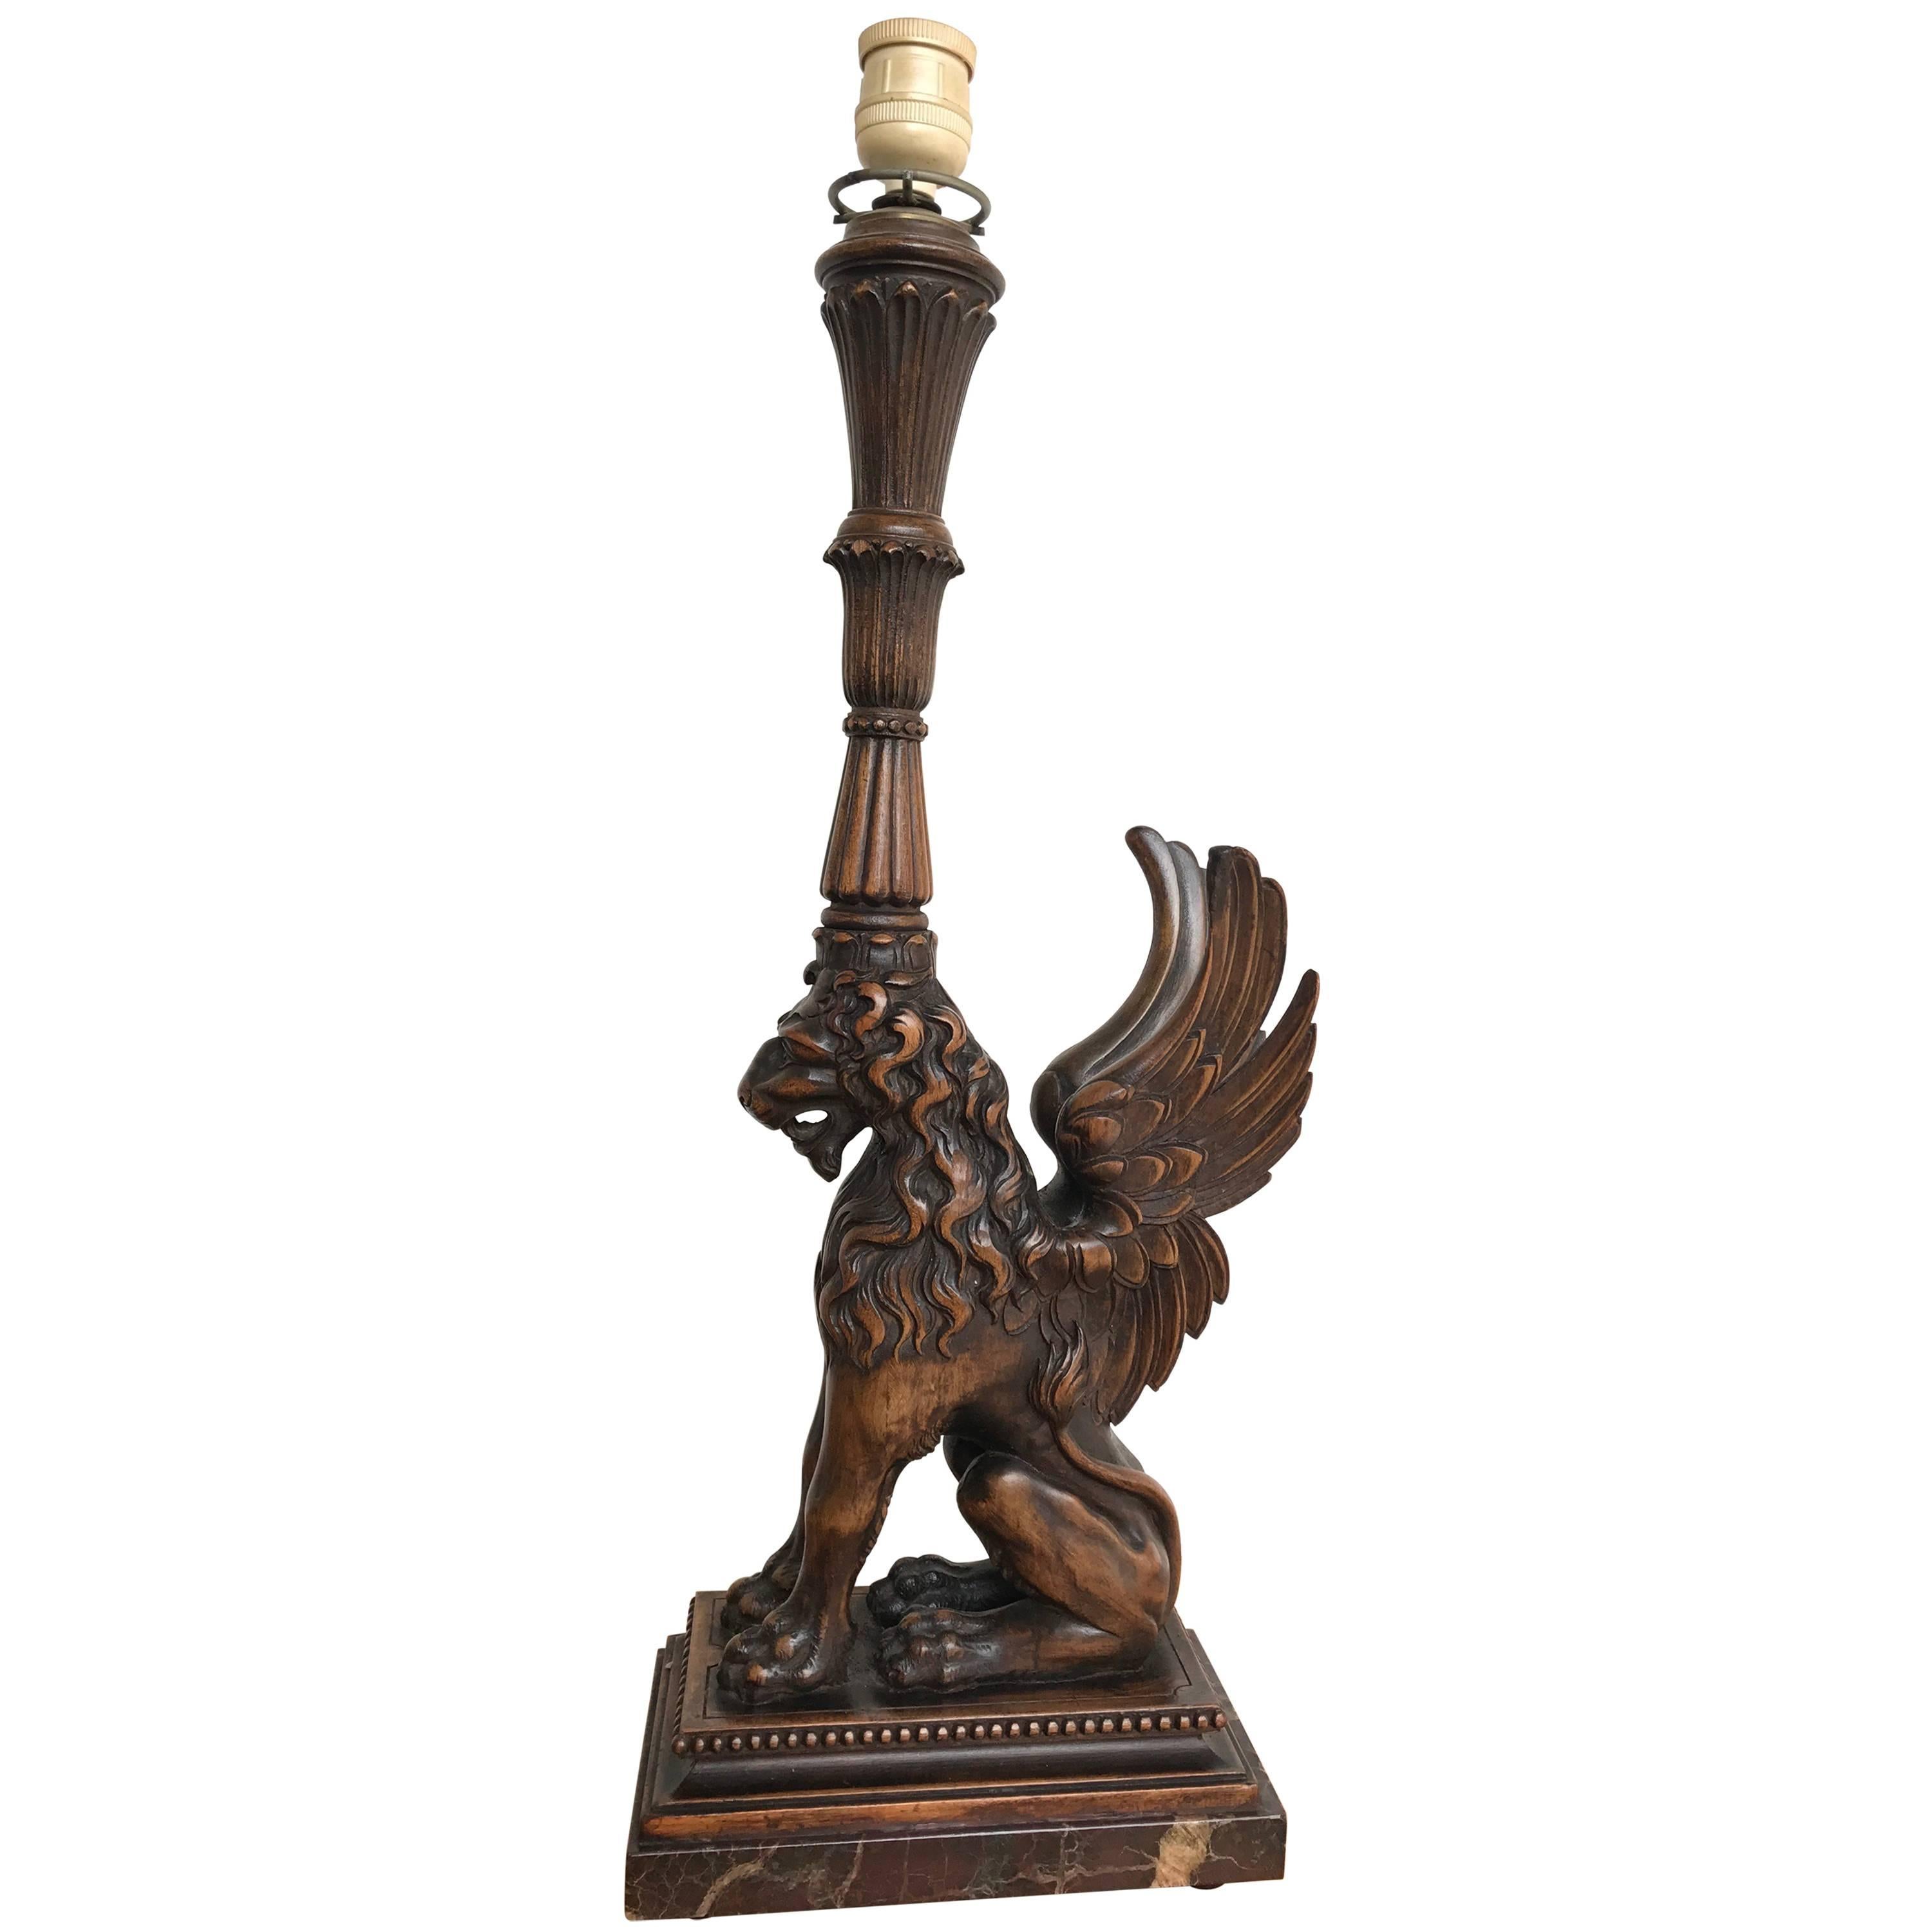 Italian Desk or Table Lamp with Carved Wood Lion Sculpture on Marble Base